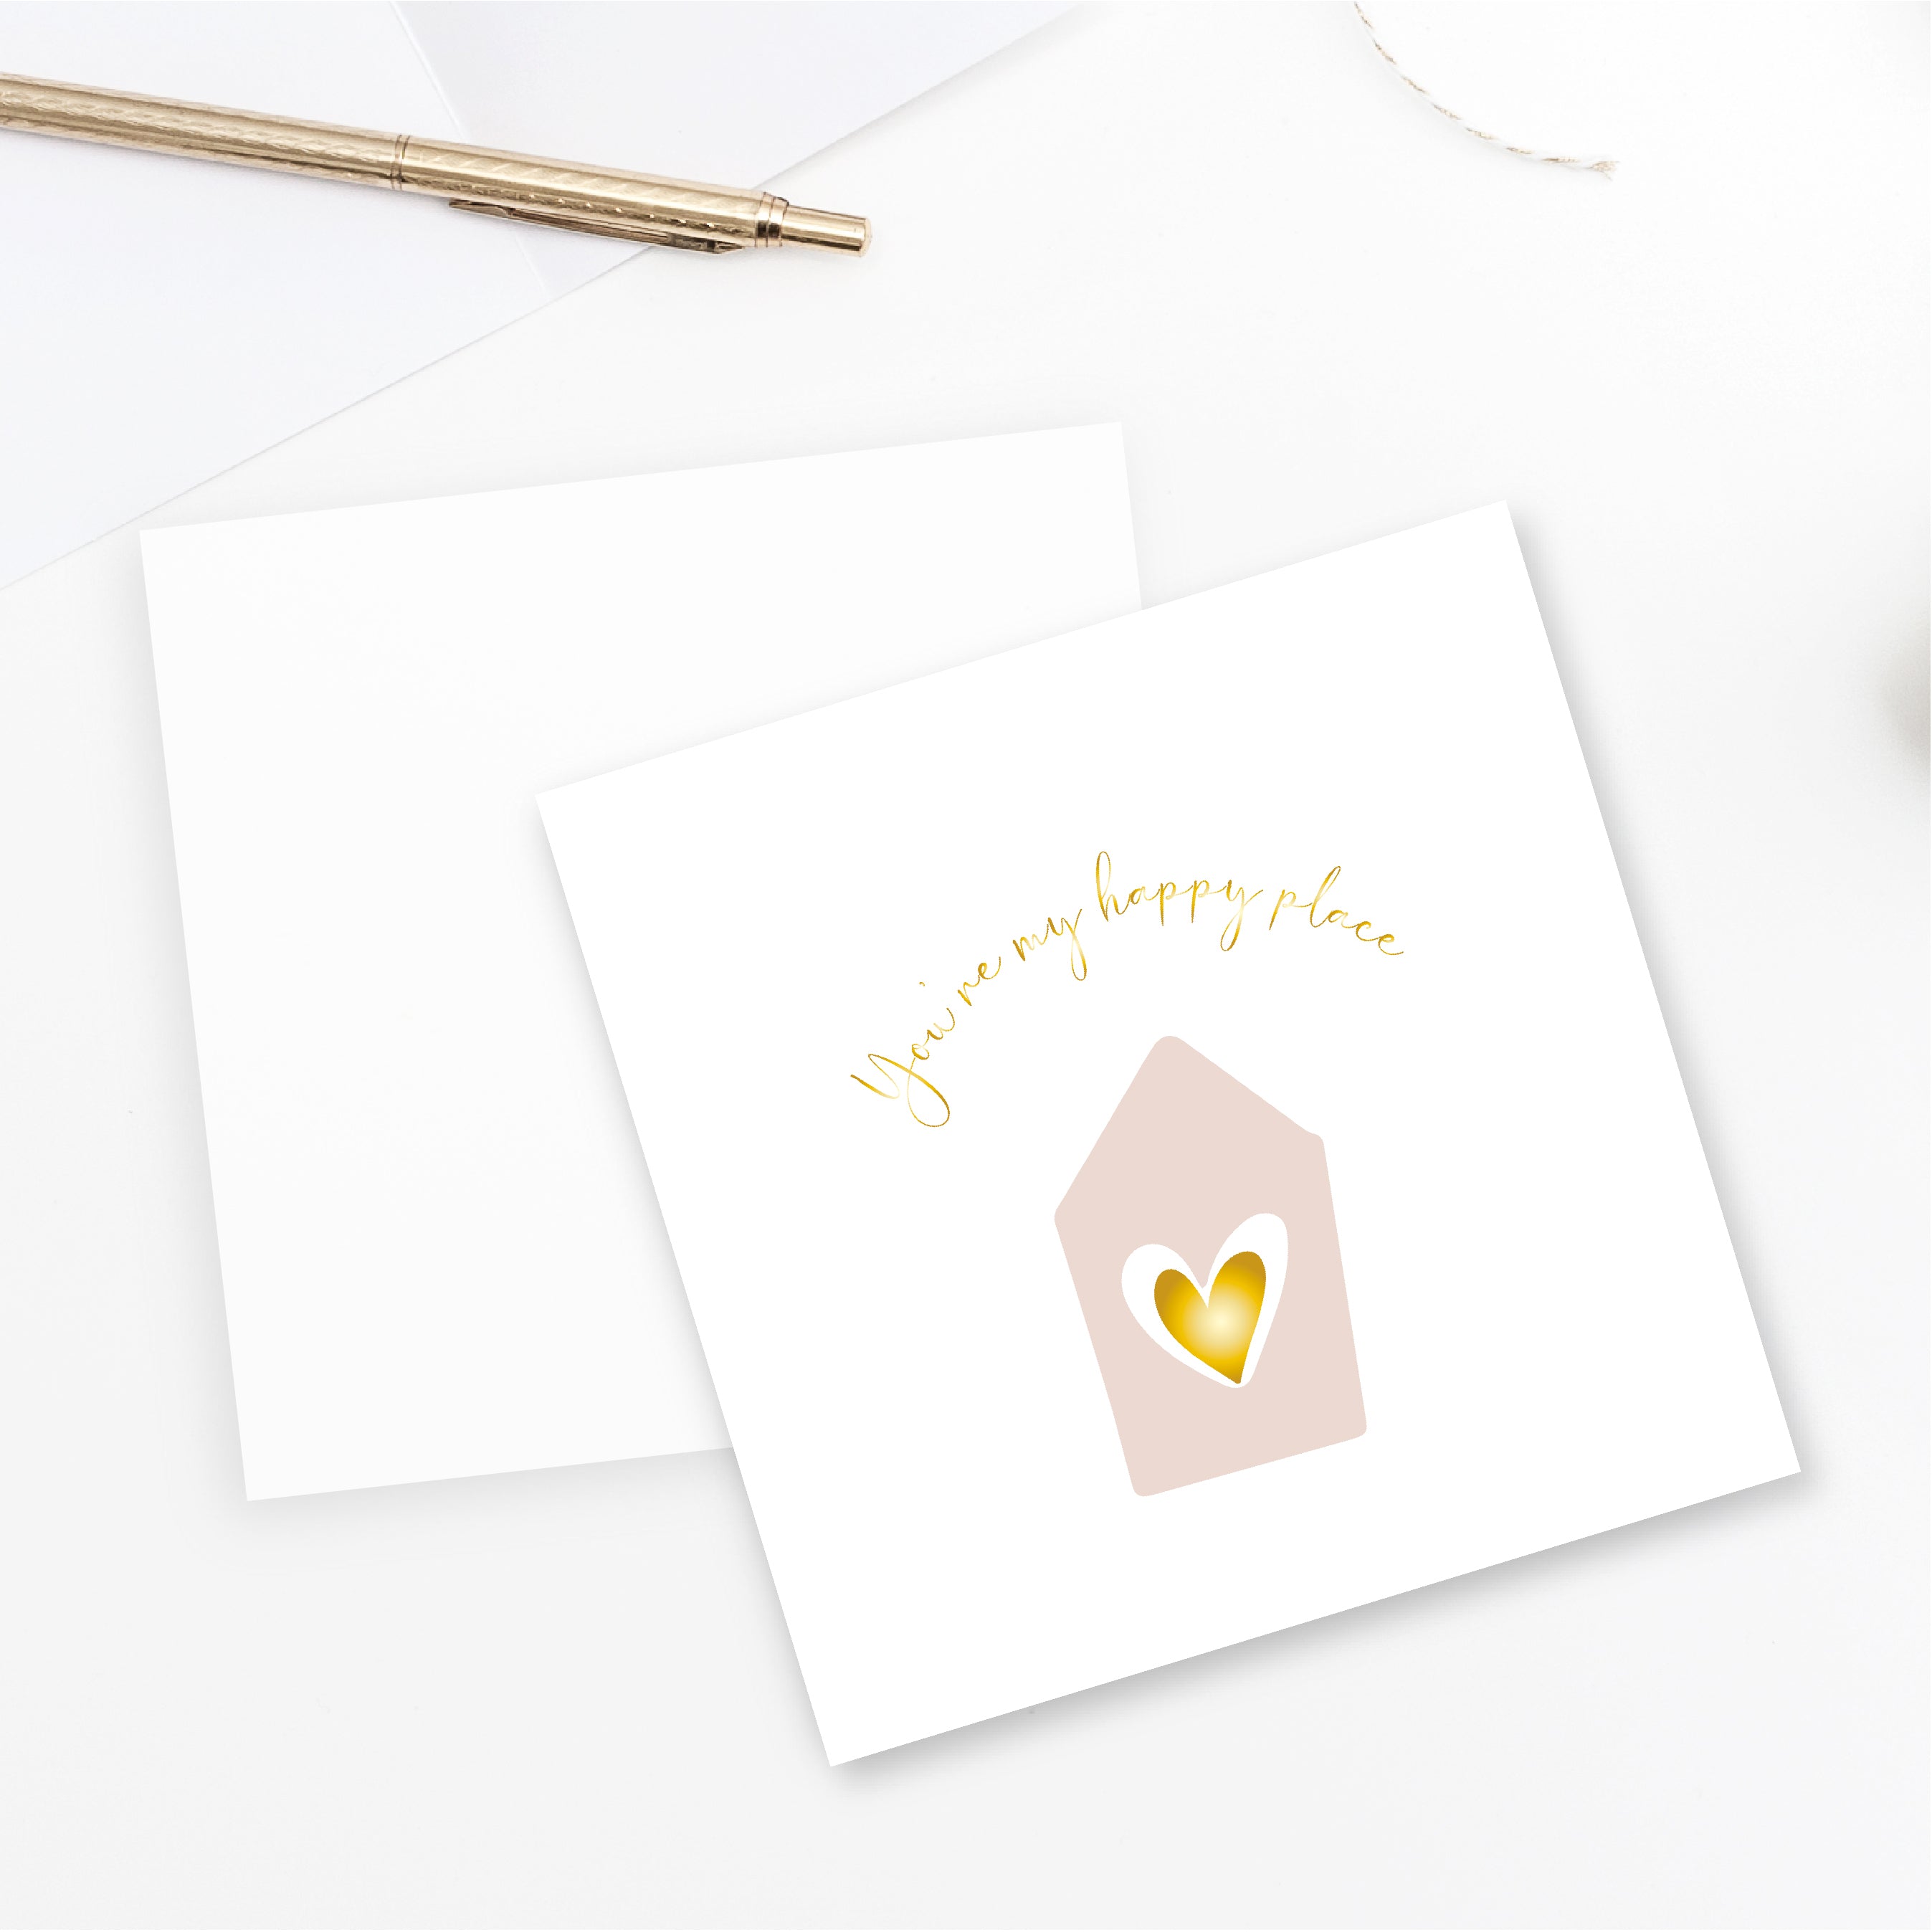 You're my happy place Card - Gold Foiled